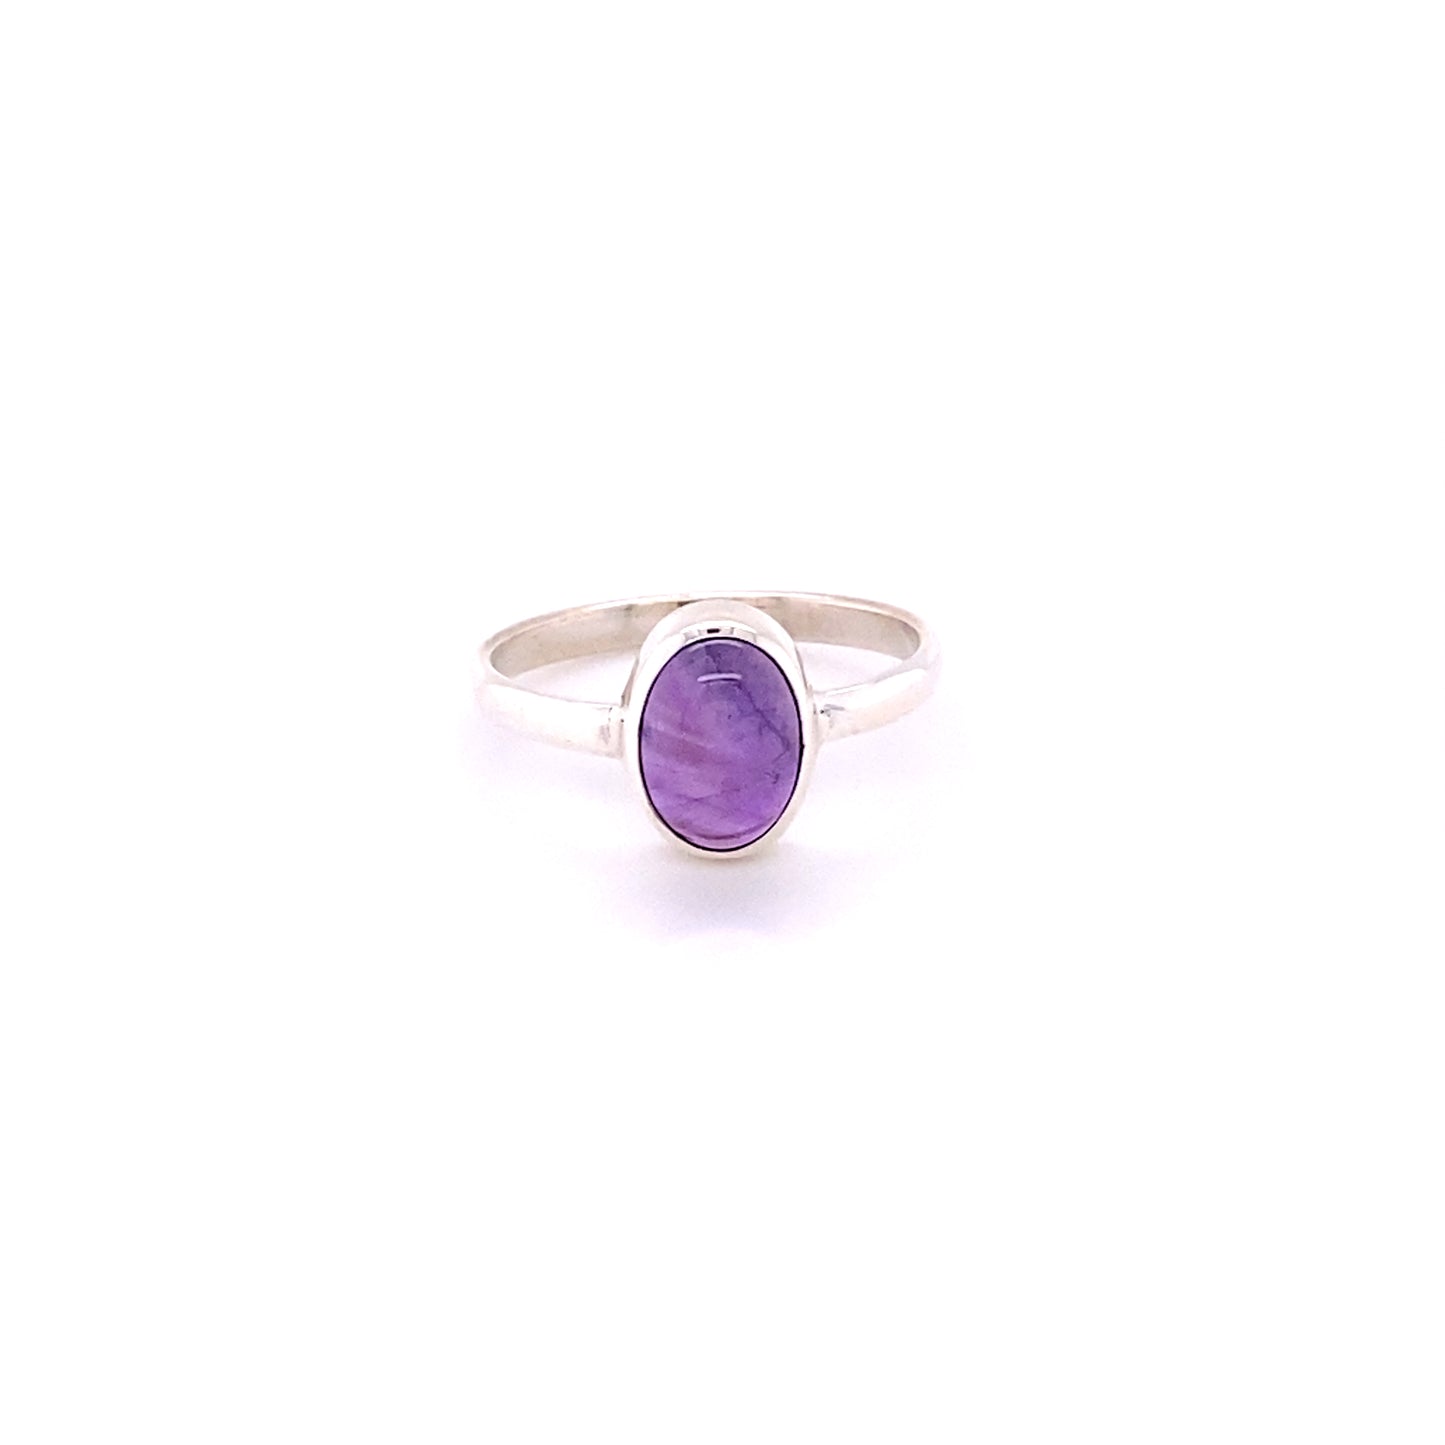 A boho-inspired Simple Oval Natural Gemstone Ring on a white background.